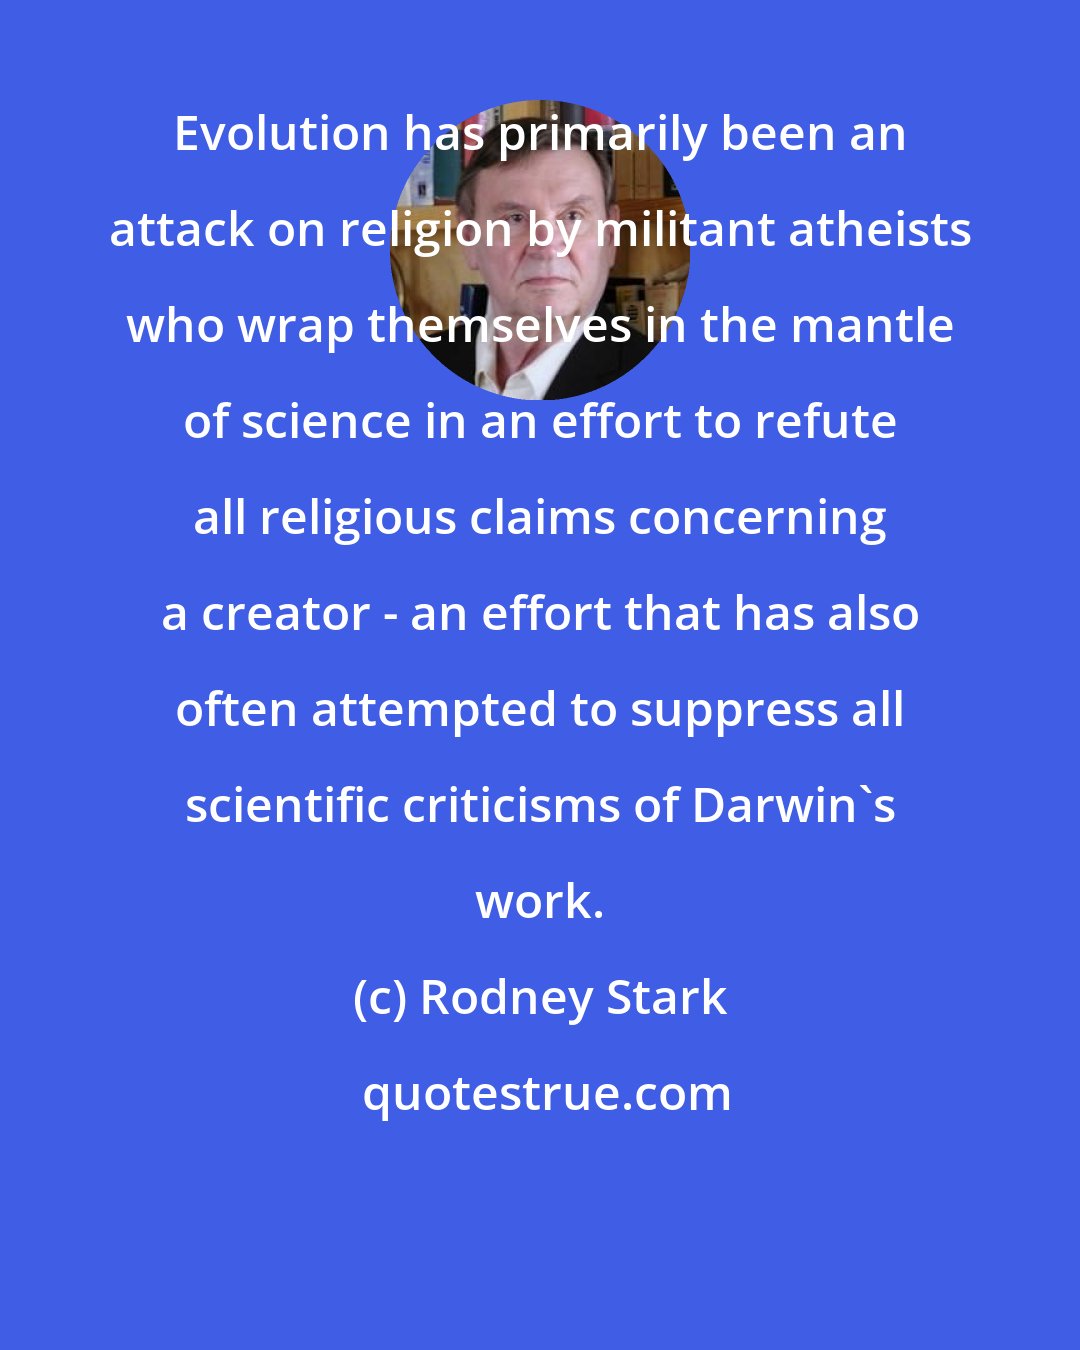 Rodney Stark: Evolution has primarily been an attack on religion by militant atheists who wrap themselves in the mantle of science in an effort to refute all religious claims concerning a creator - an effort that has also often attempted to suppress all scientific criticisms of Darwin's work.